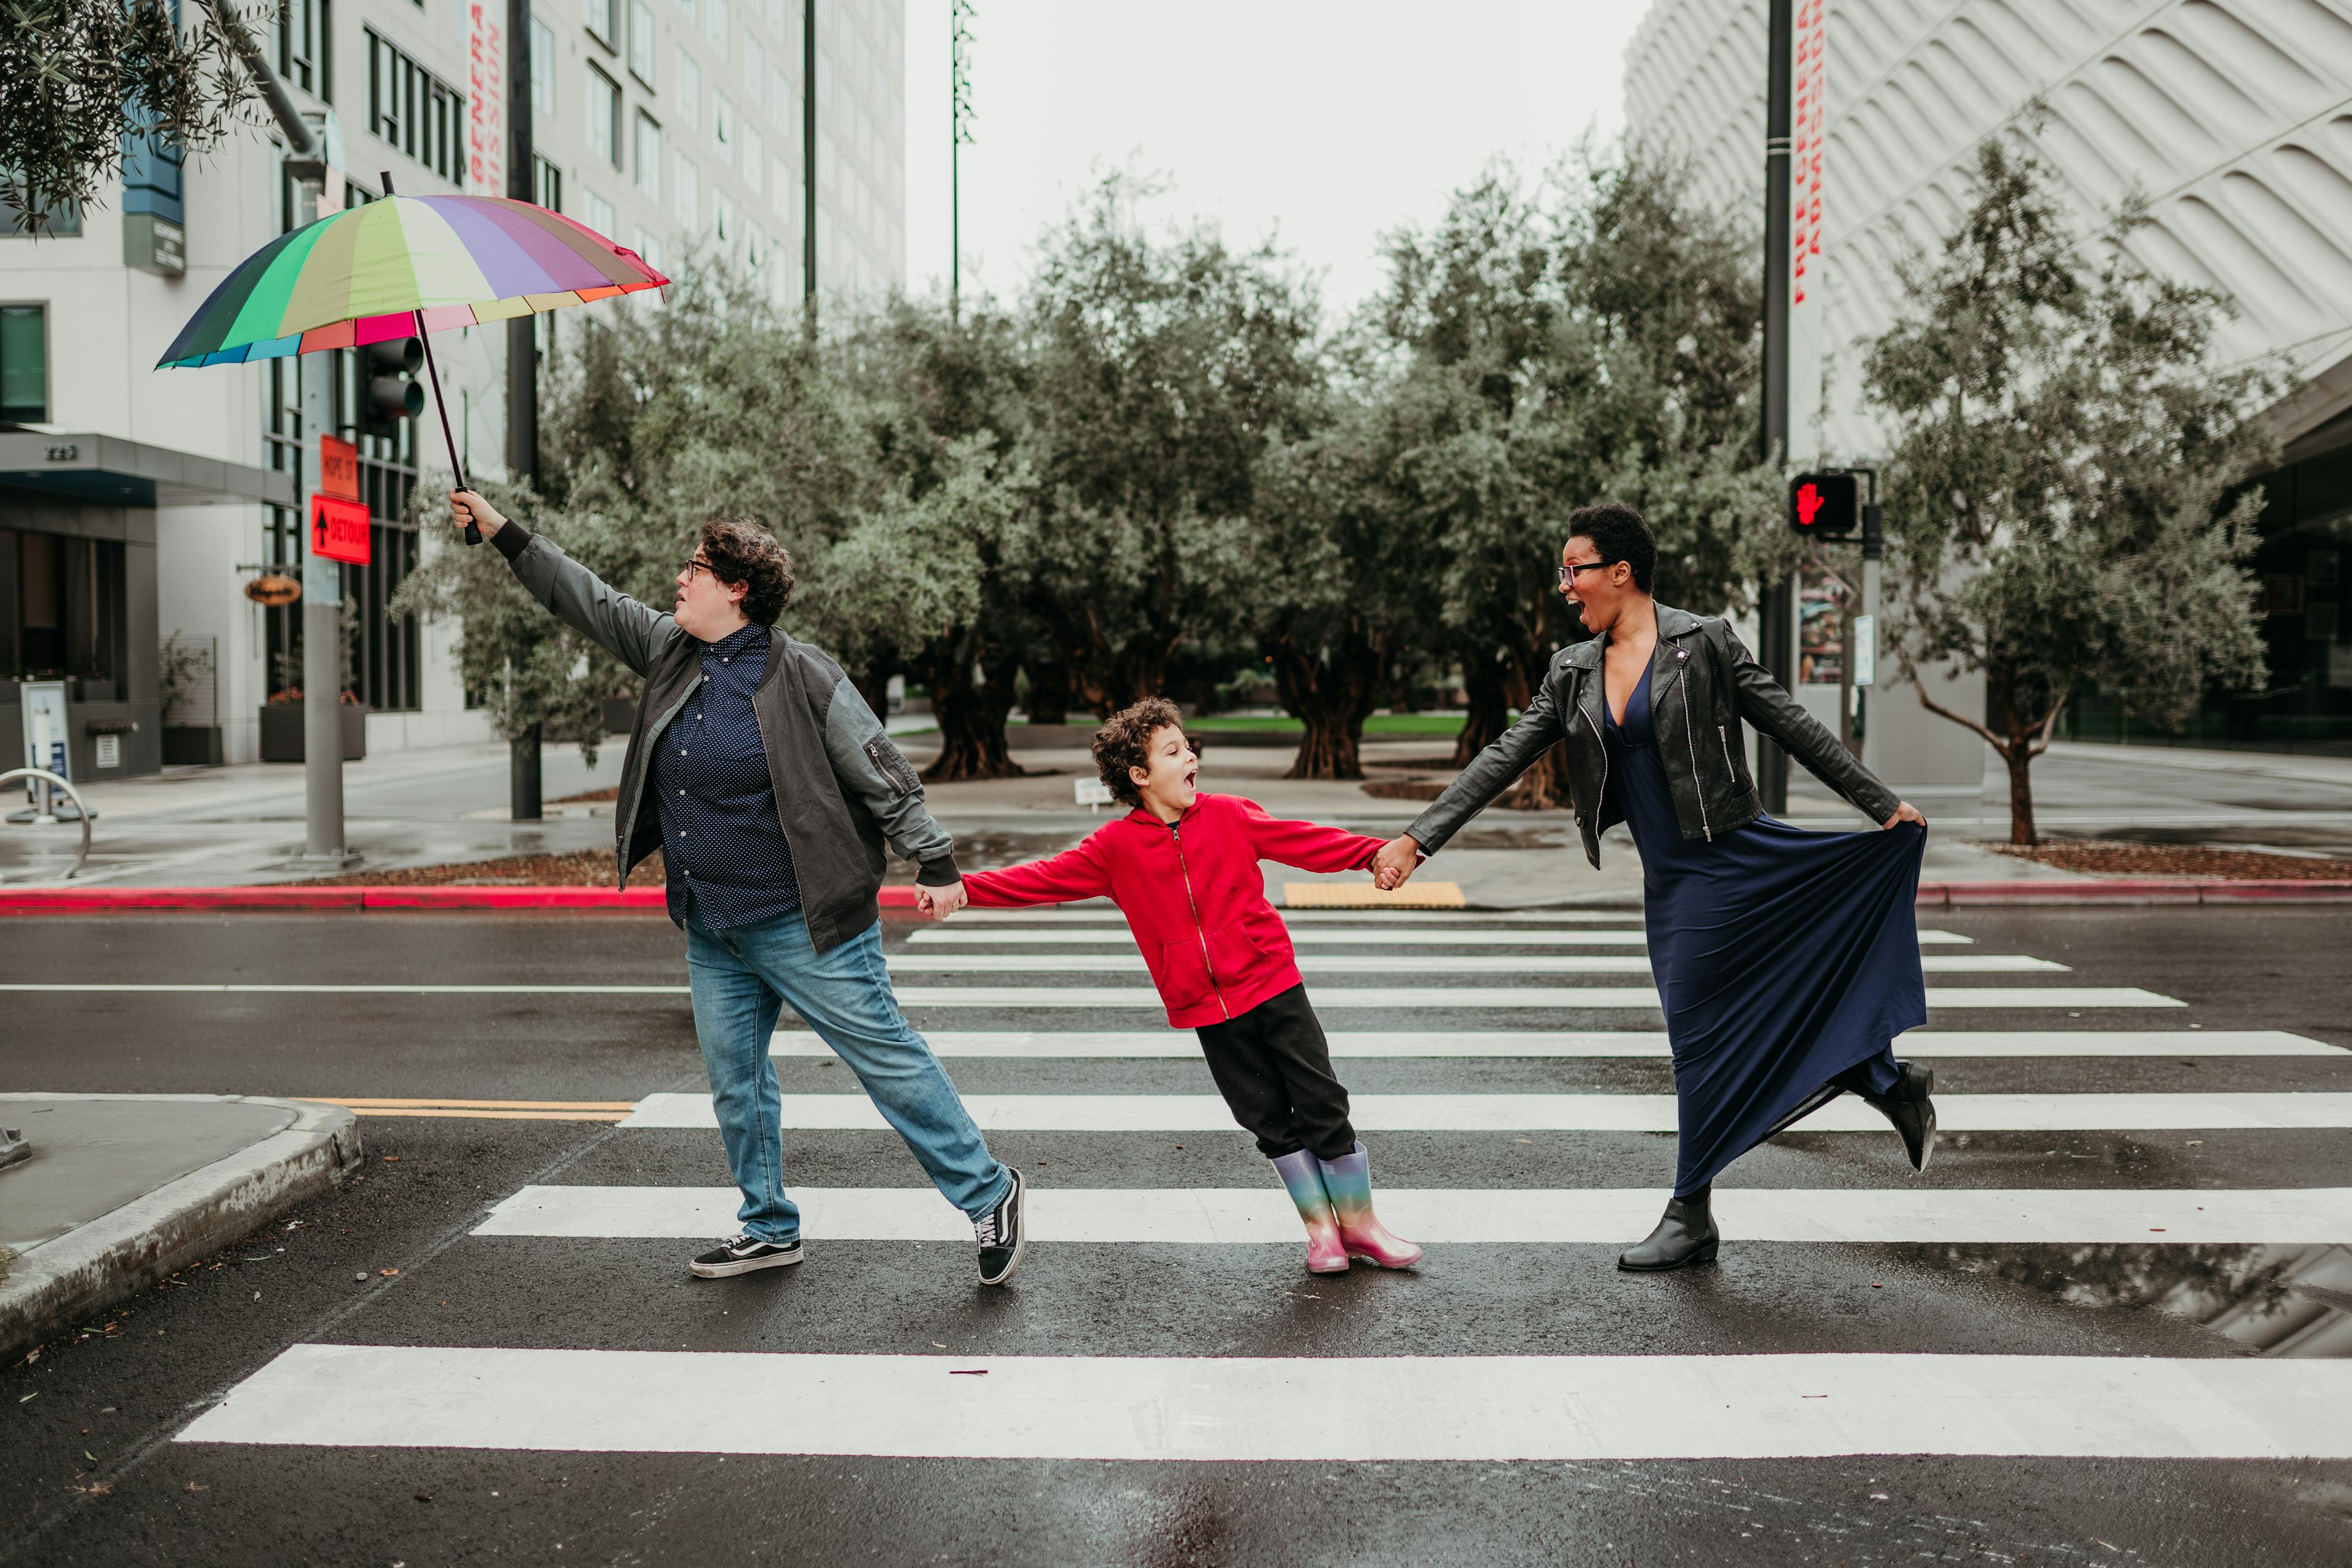 Three people holding hands and crossing a city street while one person holds a colorful umbrella aloft.